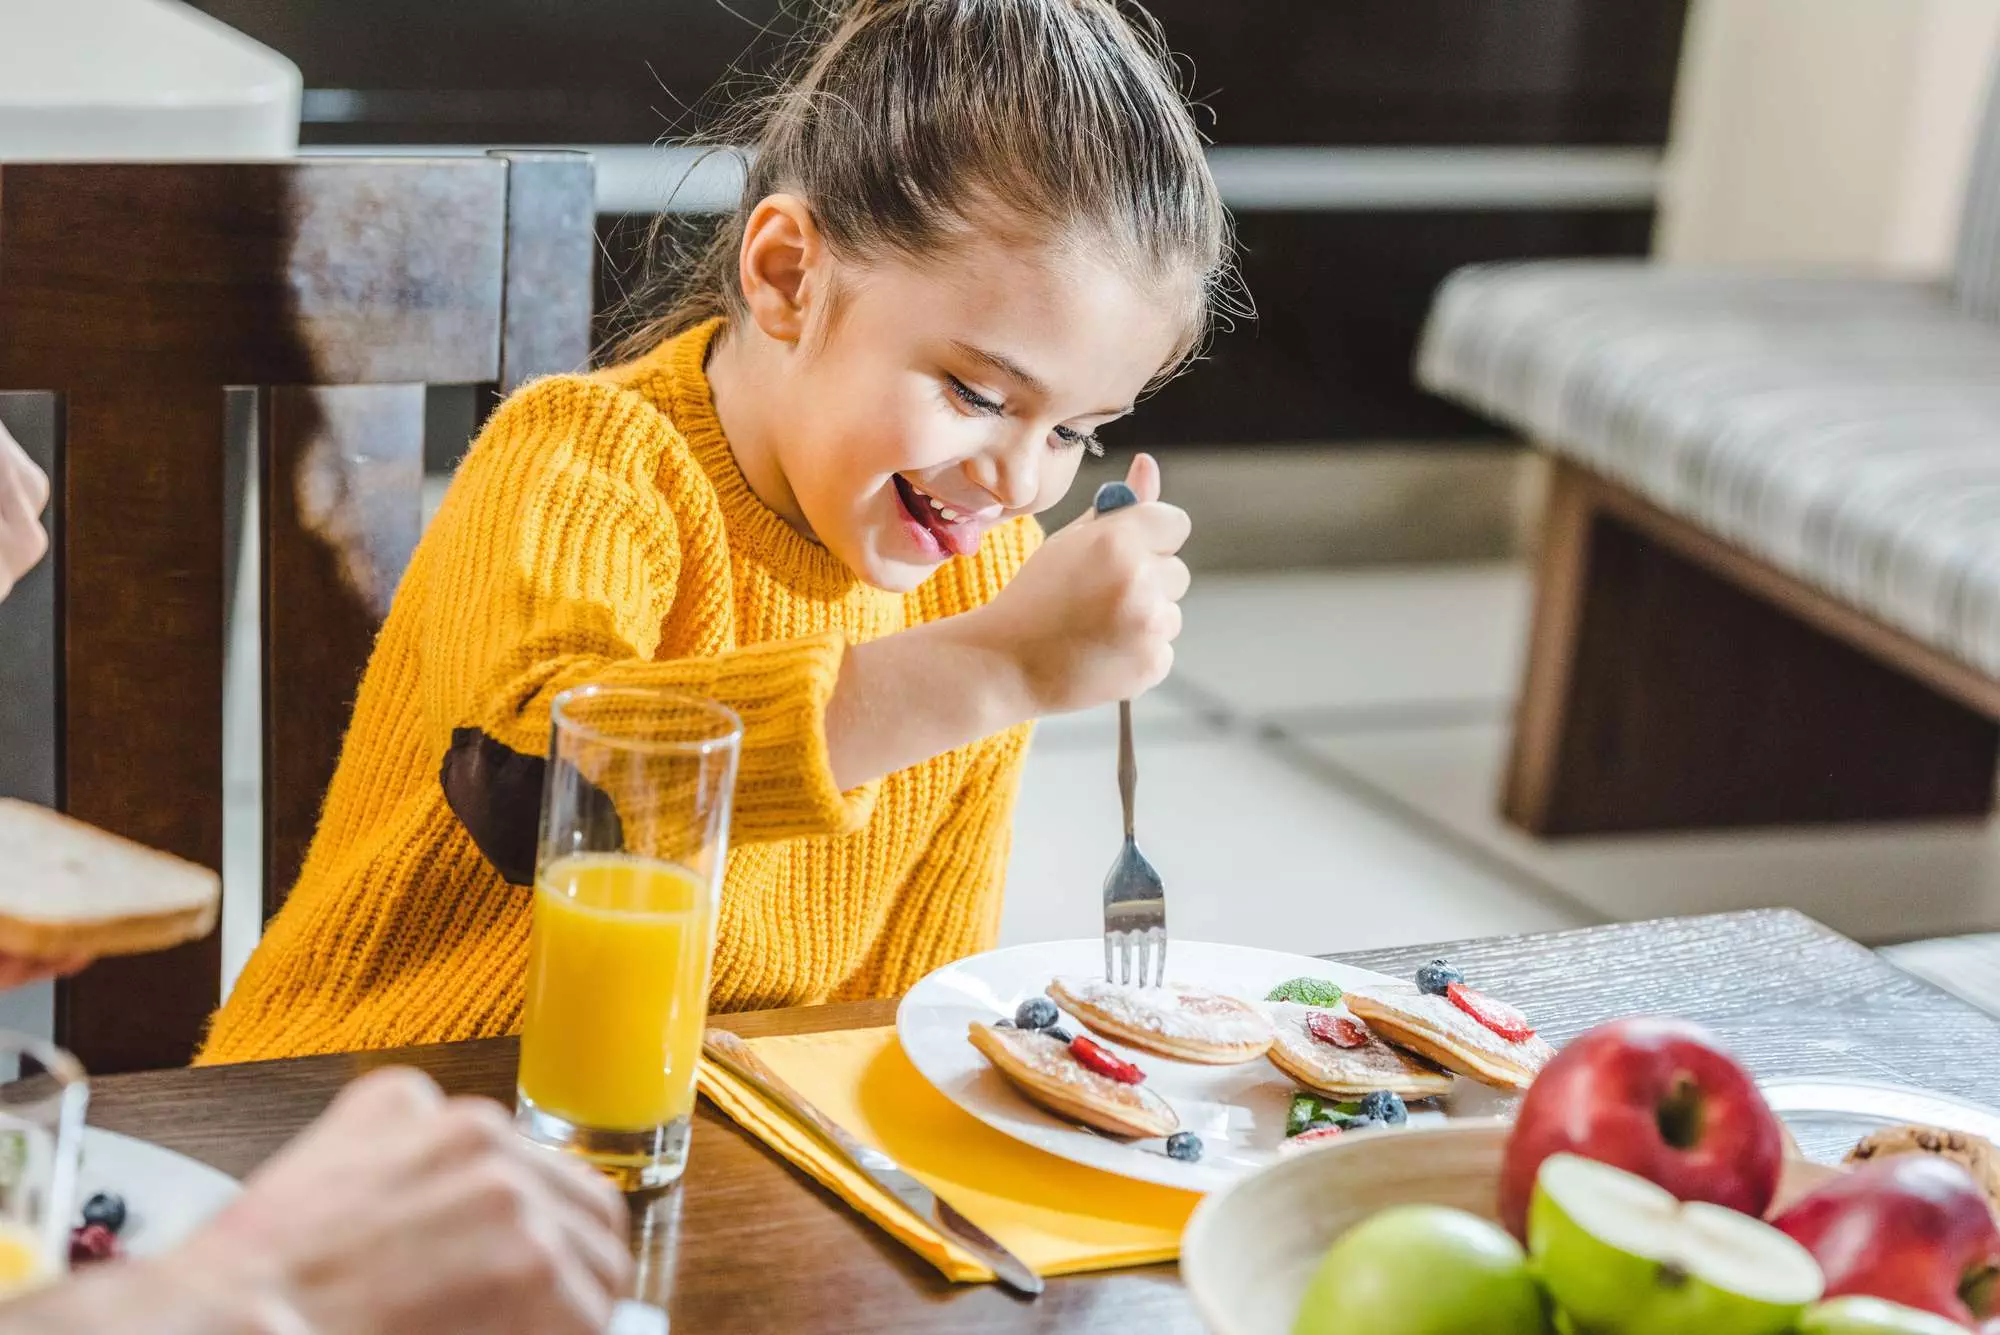 girl eating breakfast  as part of her school morning routine